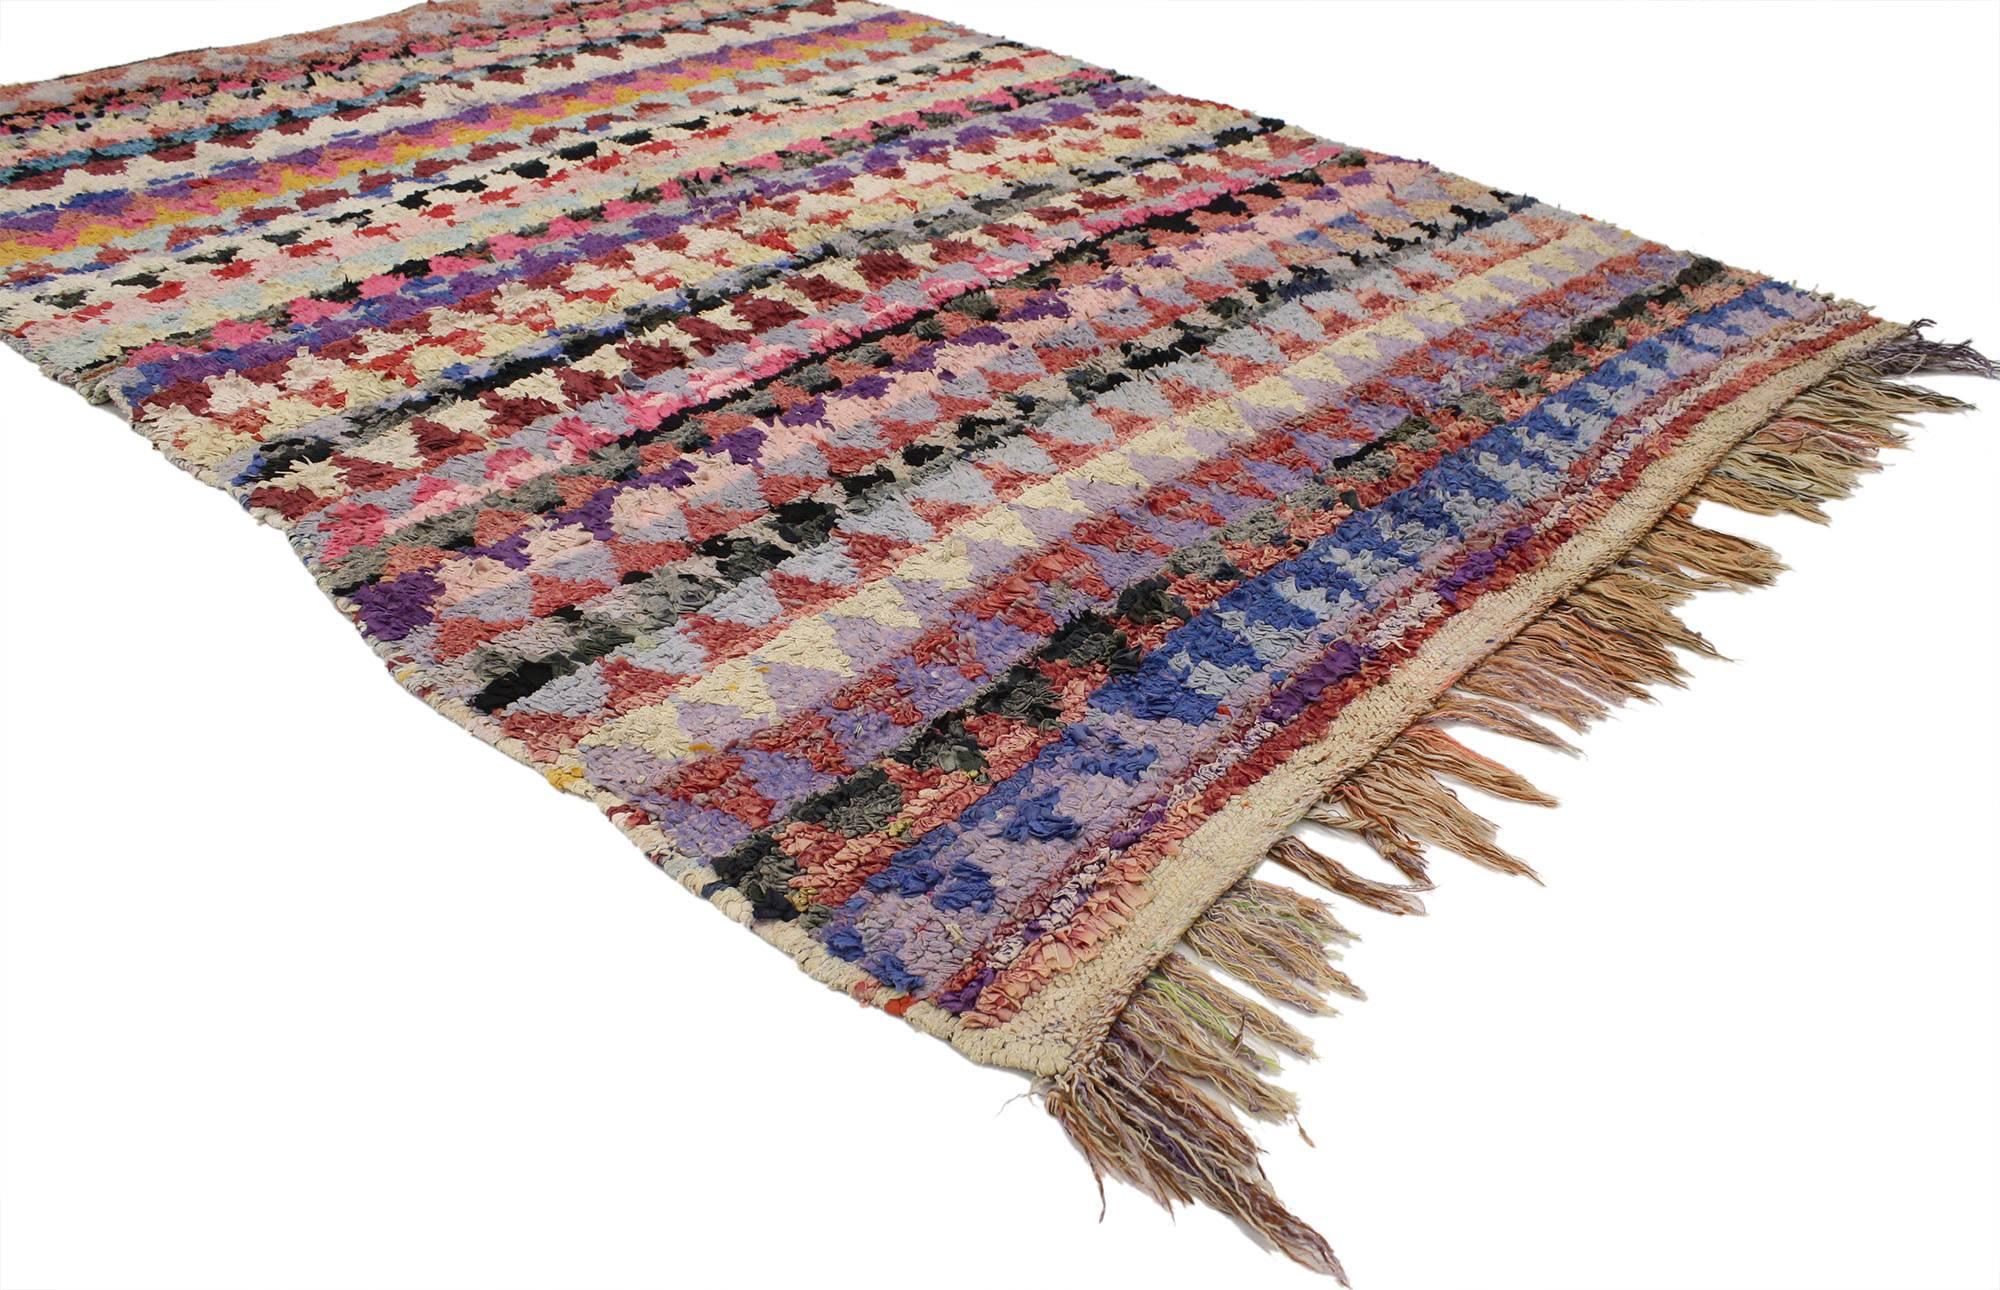 Tribal Vintage Berber Moroccan Boucherouite Accent Rug, Colorful Moroccan Shag Rug